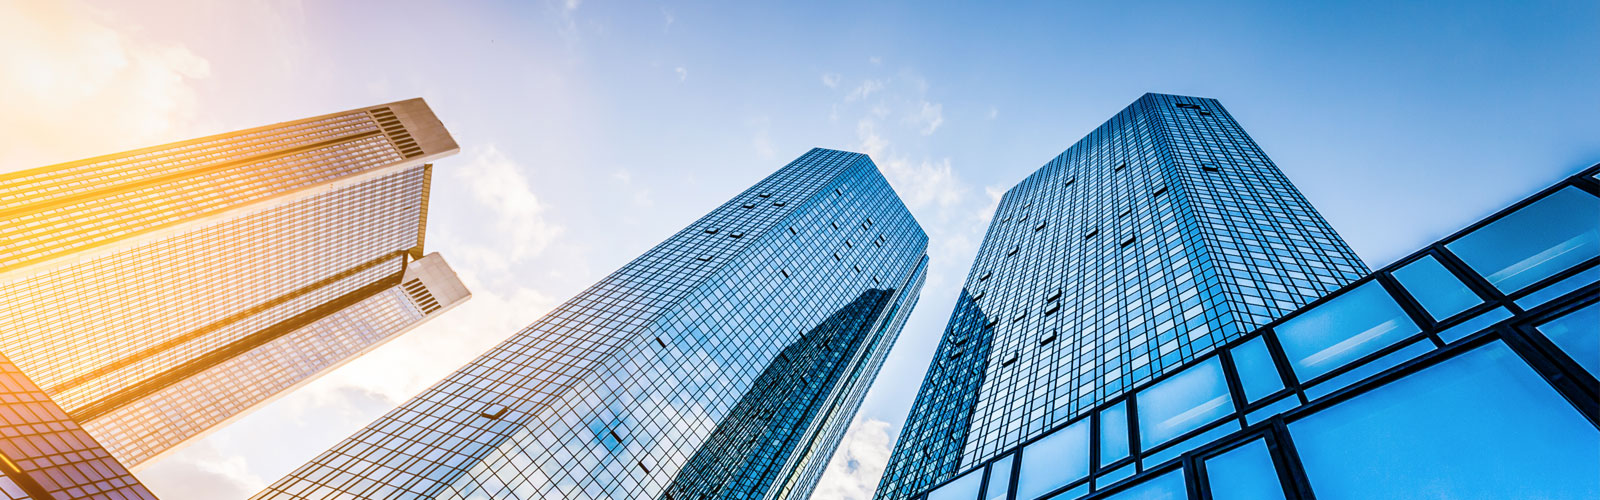 The future of commercial real estate sector in India: 2019 and beyond Update